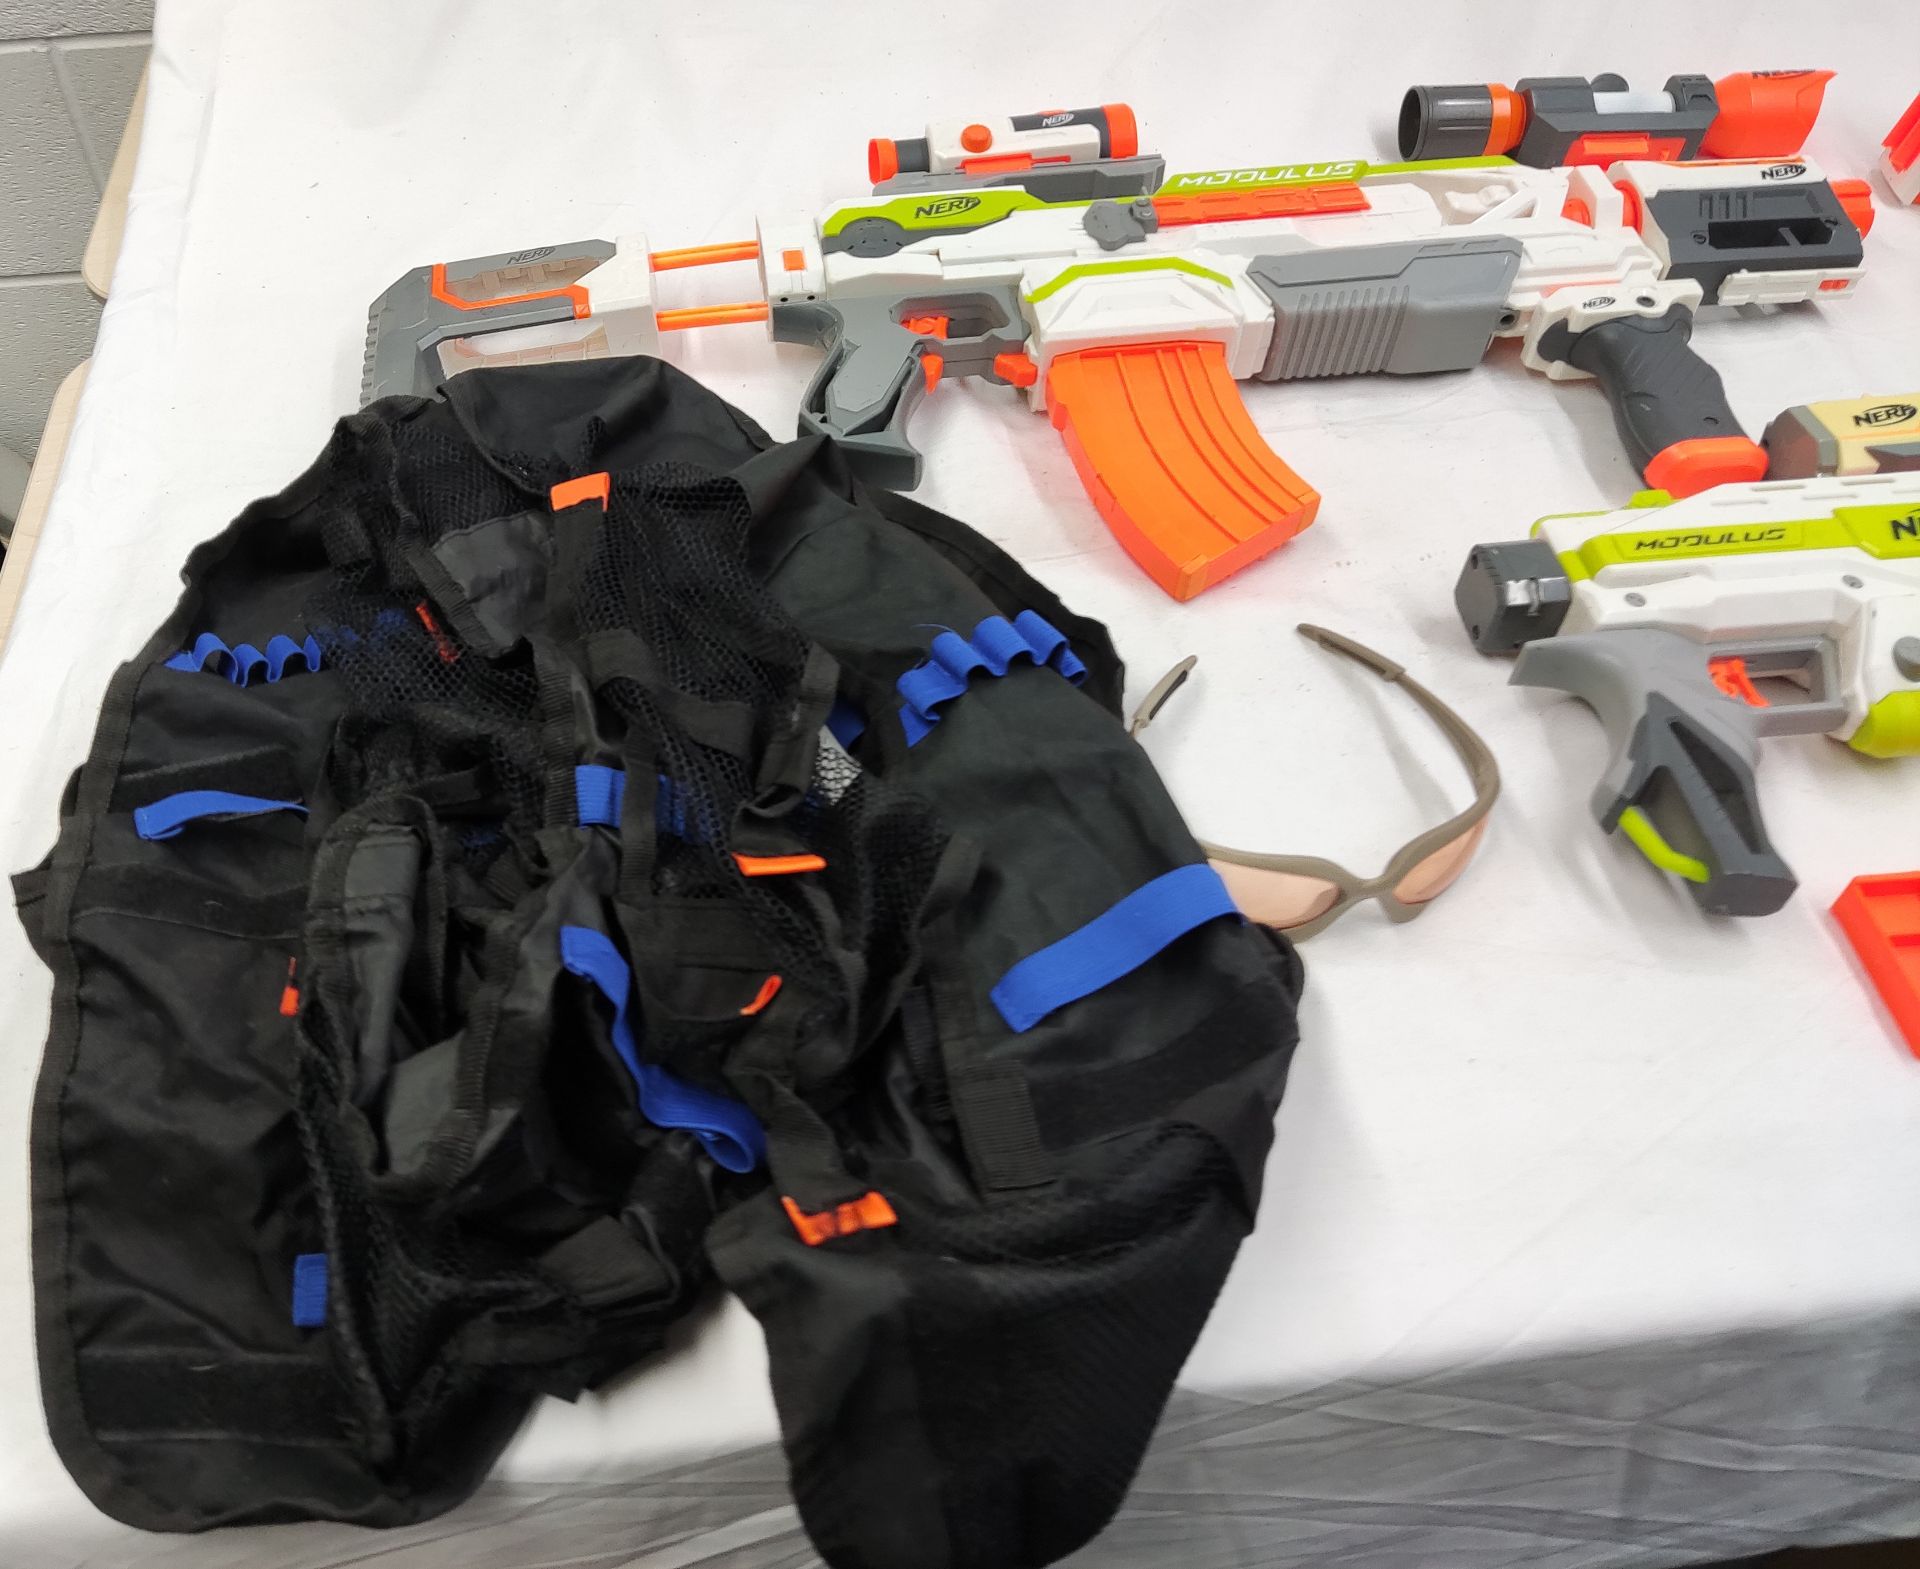 2 x Nerf Modulus Guns Plus Various Attachments And Accessories - Used - CL444 - NO VAT ON THE HAMMER - Image 2 of 10